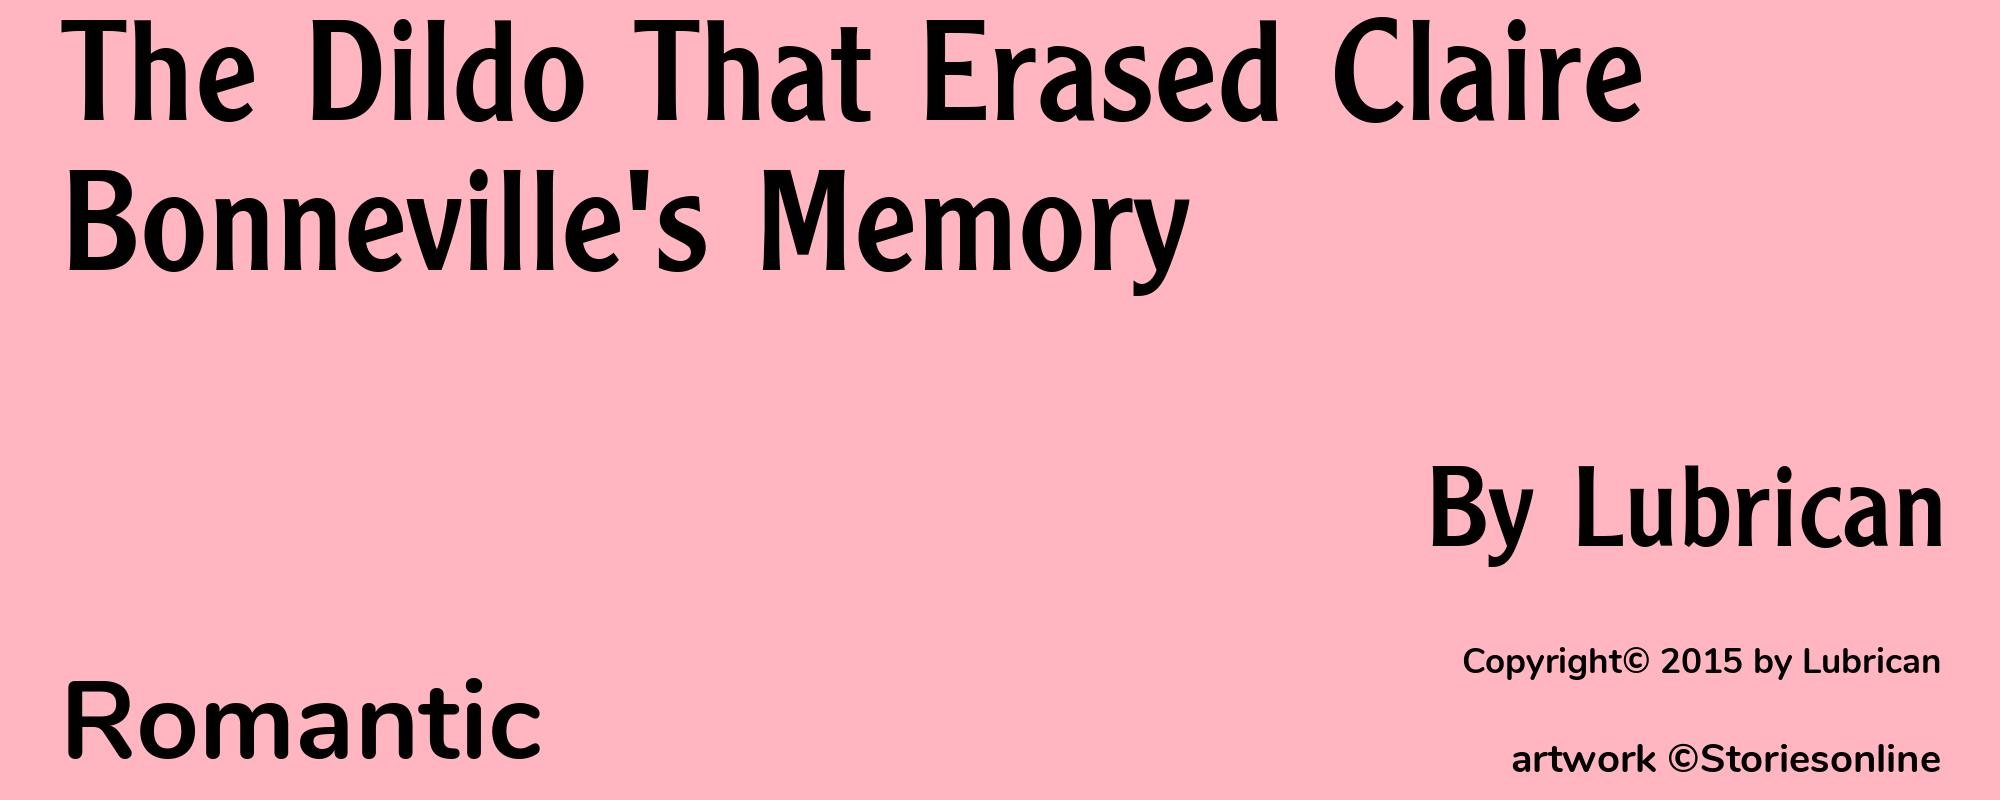 The Dildo That Erased Claire Bonneville's Memory - Cover